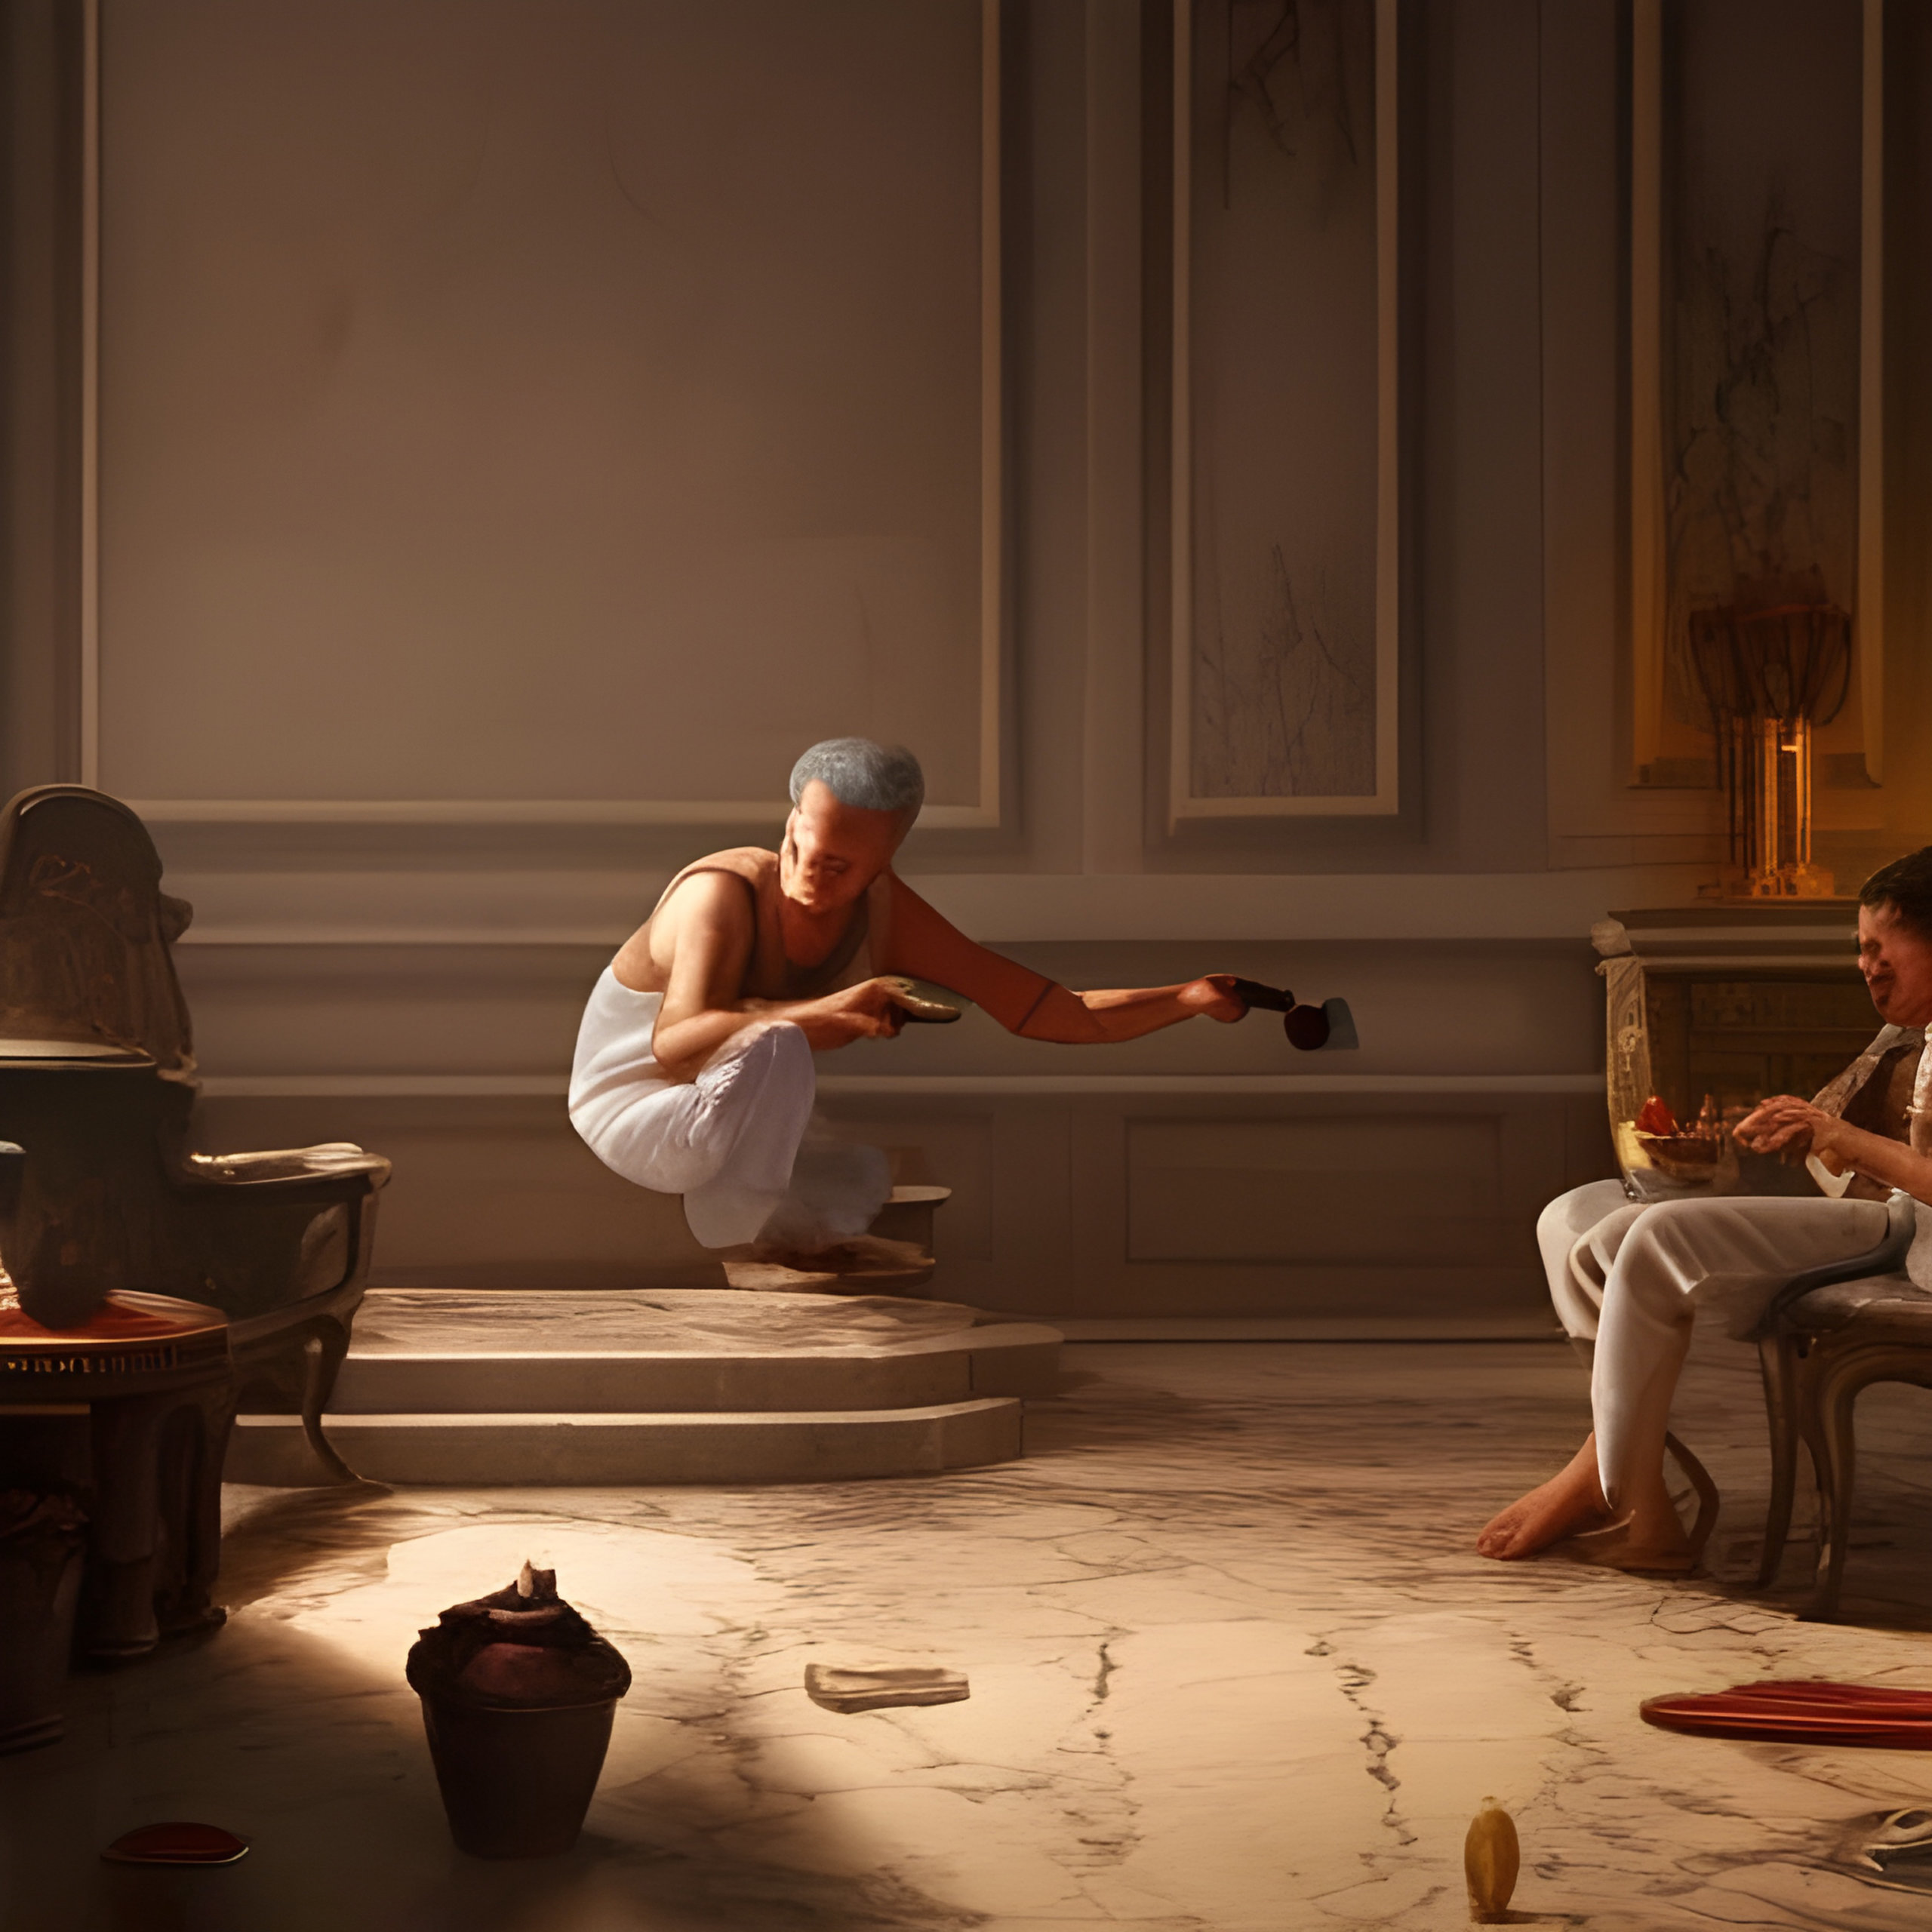 "Noble Man Child" AI artwork using the prompt "skinny snobby man plays with action figures on the floor of his marble palace as servants scurry around tending to his needs and offering fruit, wine and pillows" on NightCafe Studio